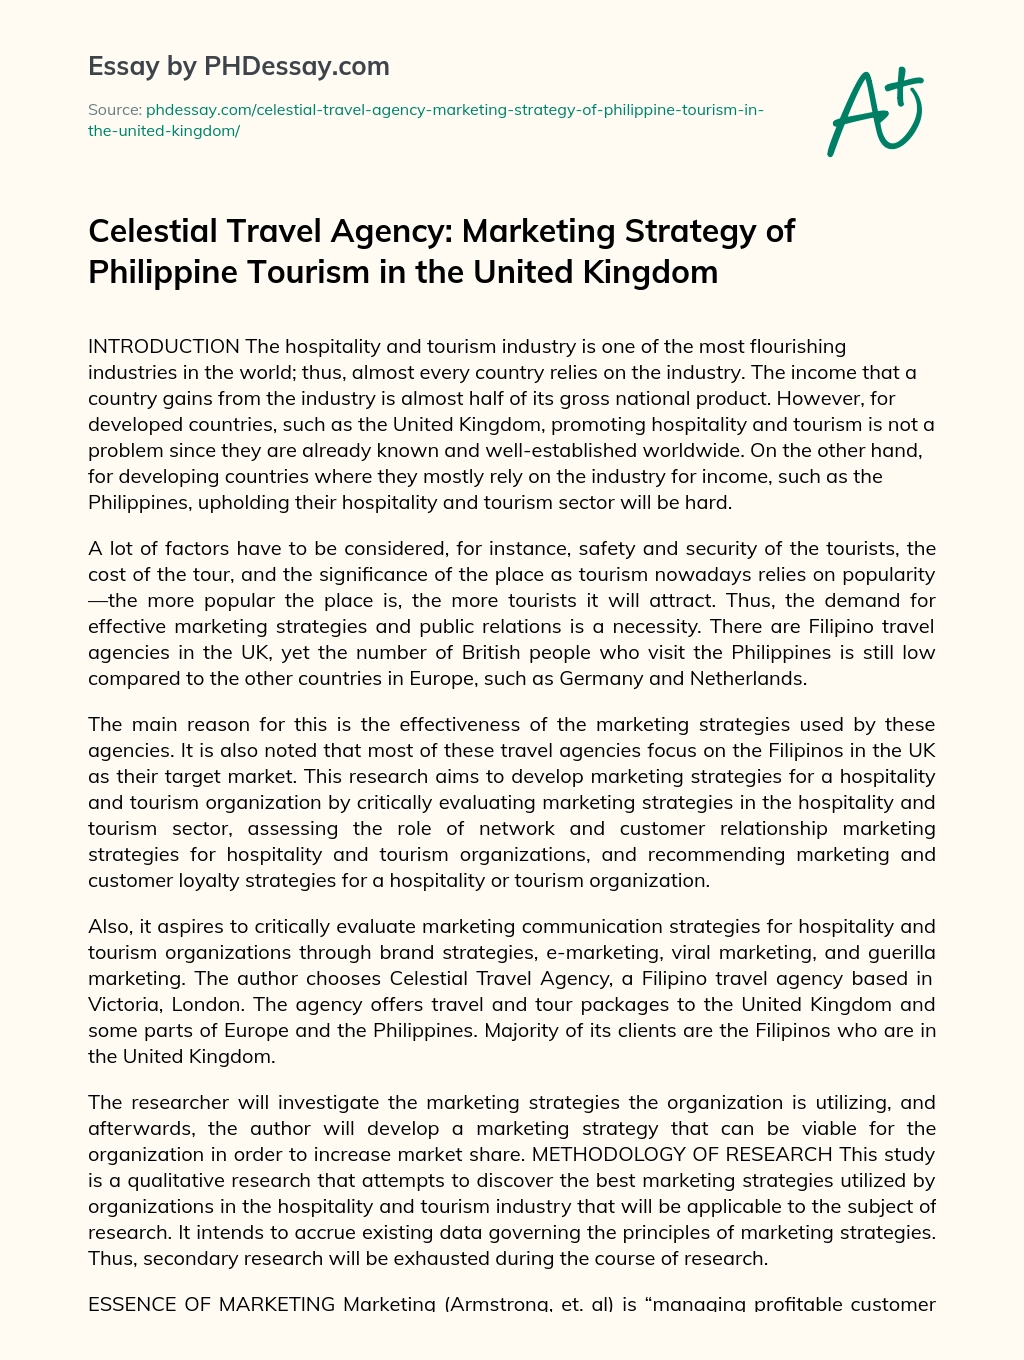 Celestial Travel Agency: Marketing Strategy of Philippine Tourism in the United Kingdom essay